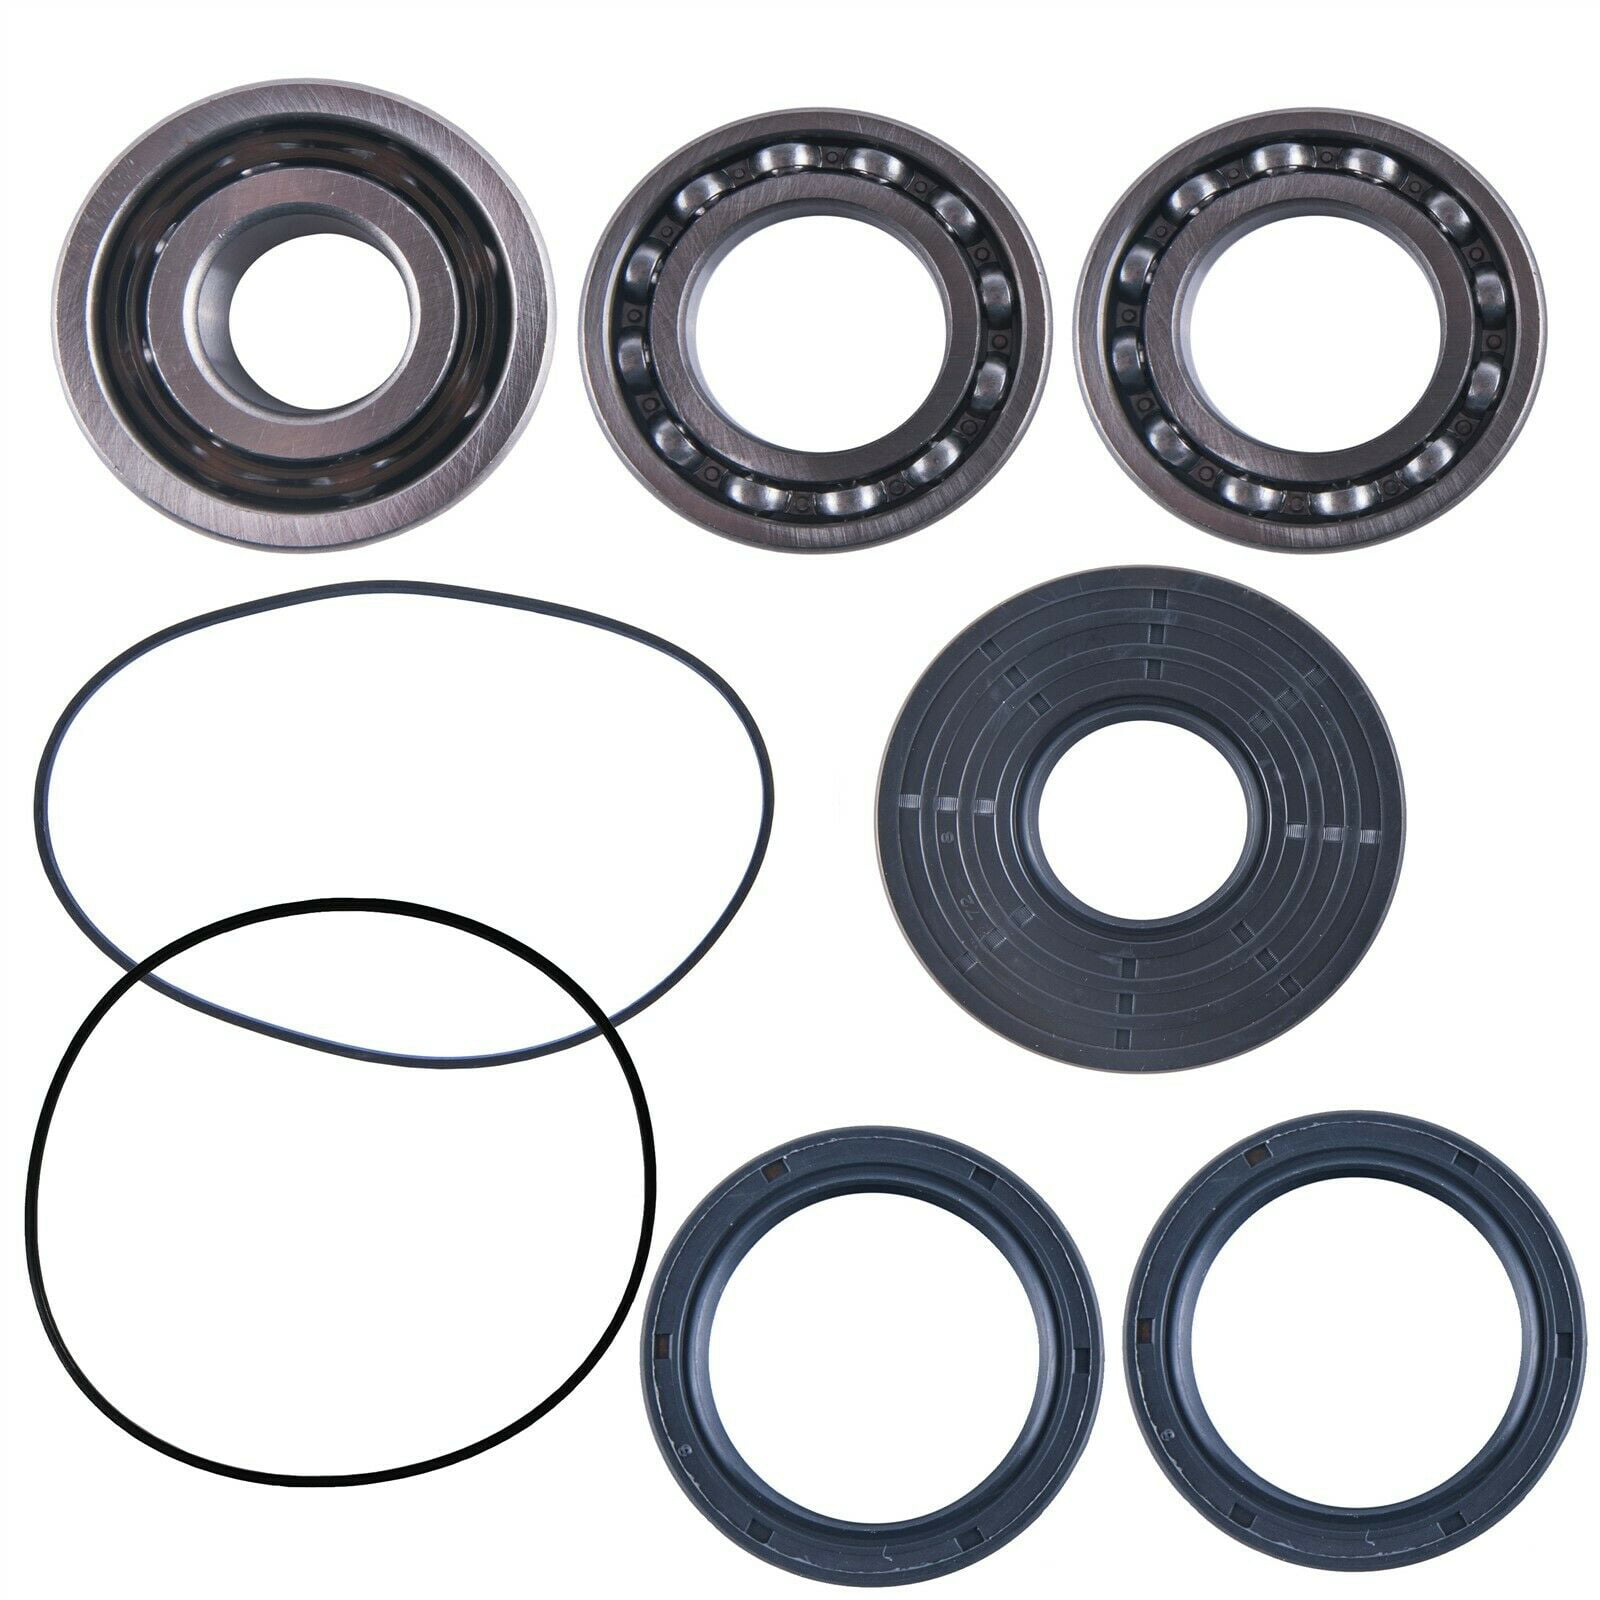 NEW ALL BALL FRONT Differential Diff Bearing & Seal Rebuild Kit Polaris RZR 800